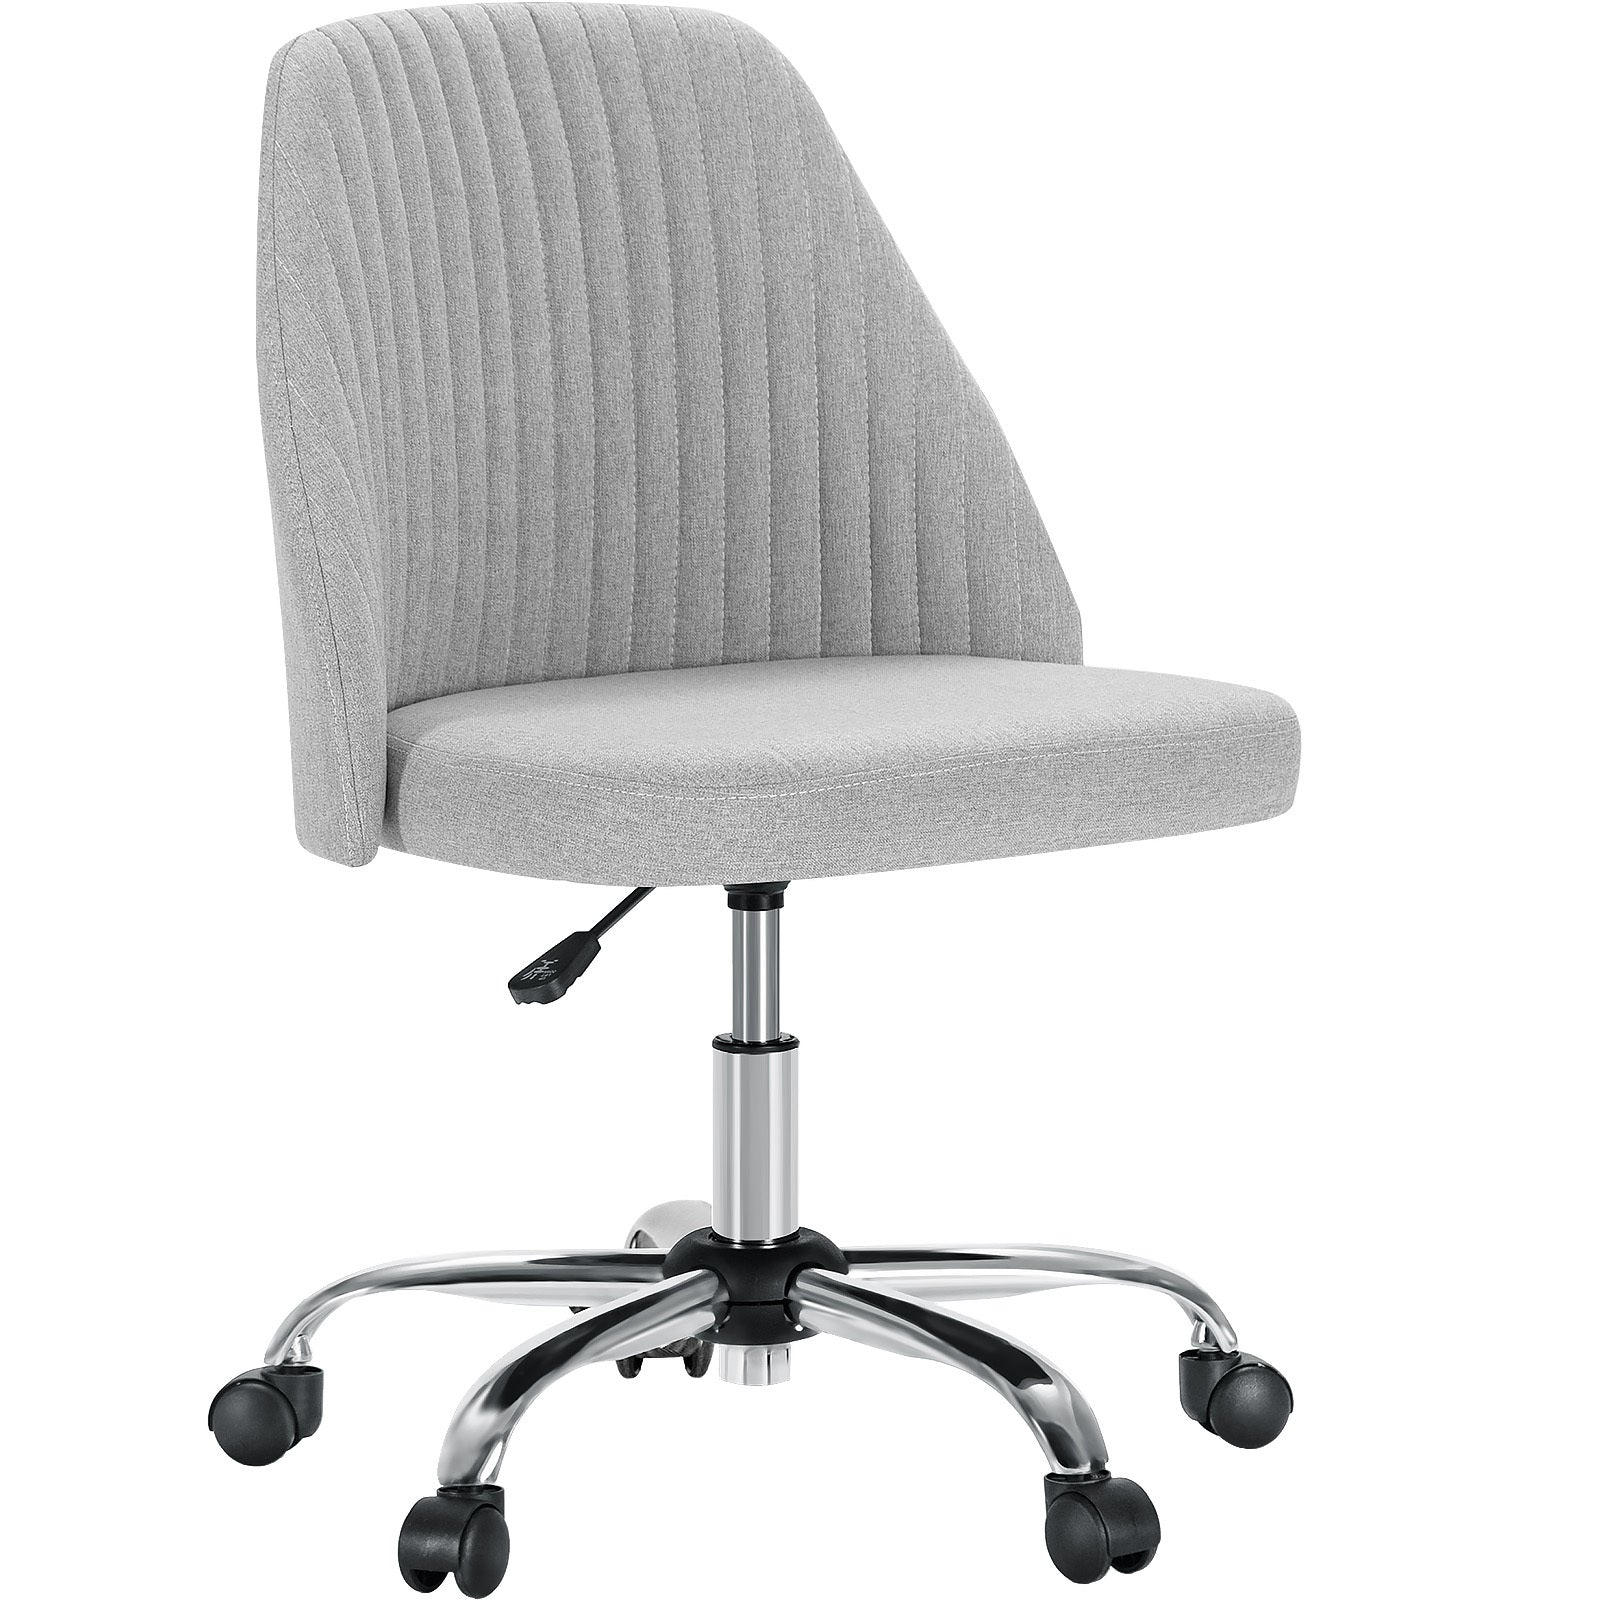 Sweetcrispy Armless Home Office Desk Chair with Wheels gray-fabric